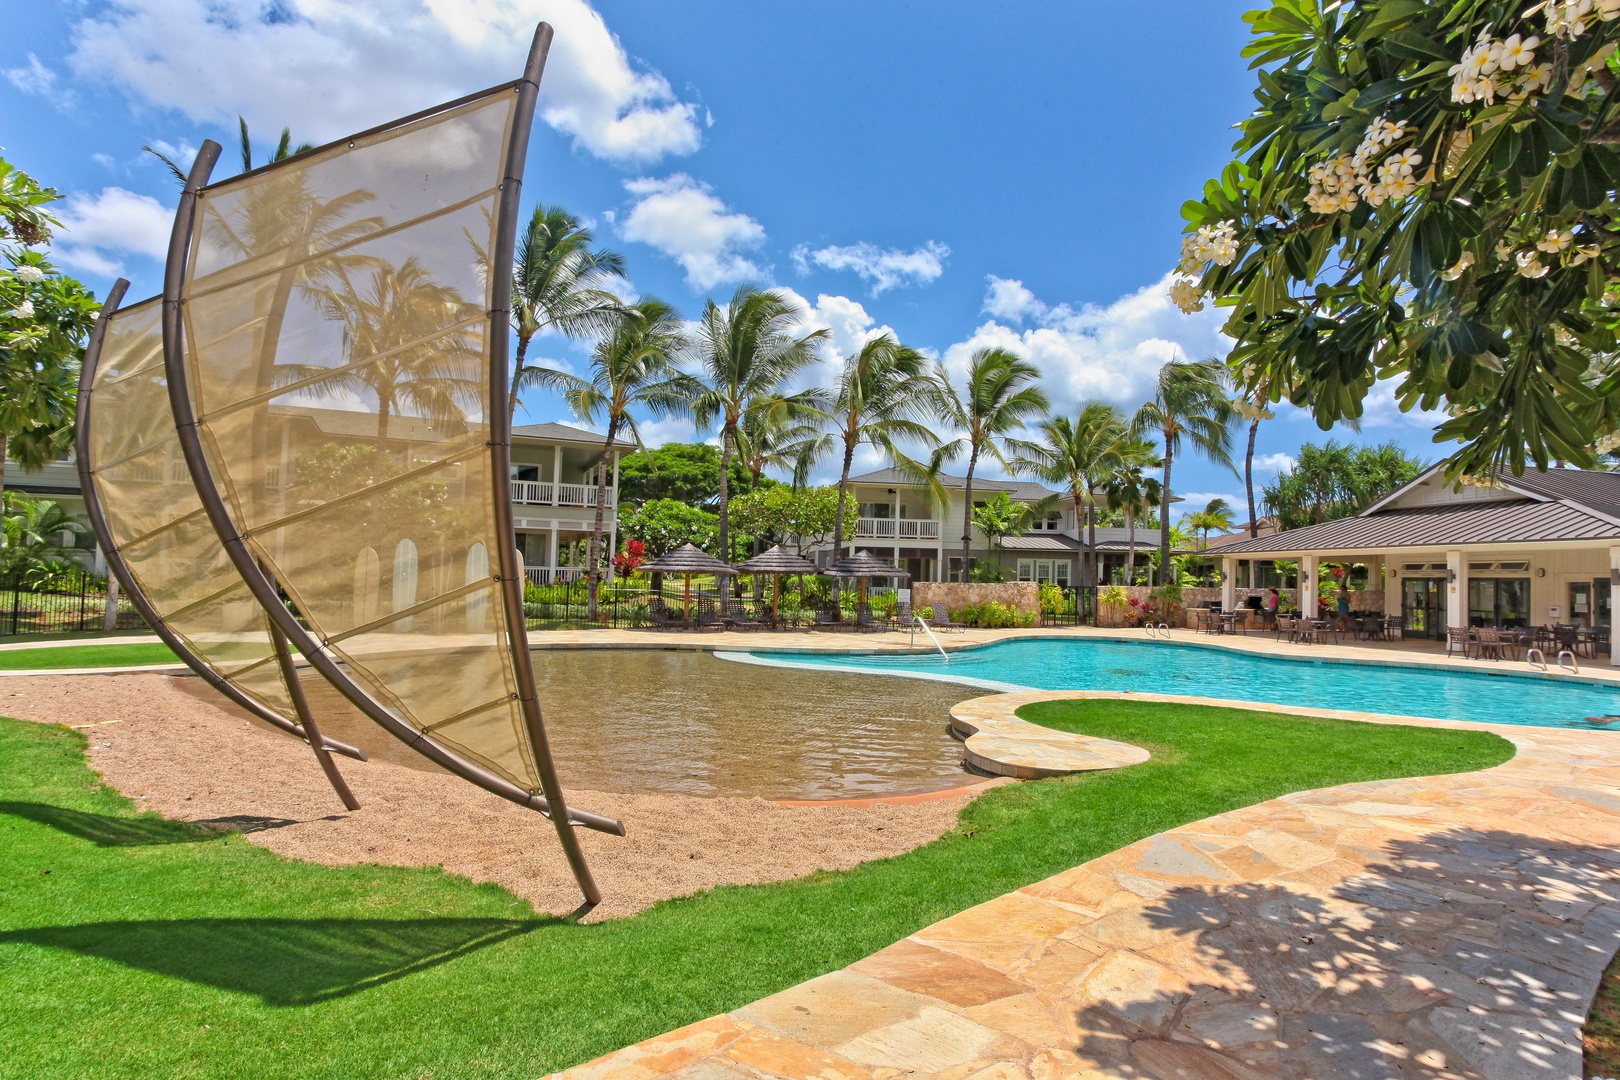 Kapolei Vacation Rentals, Coconut Plantation 1074-1 - Go for a swim in the sparkling waters and rest in the lounge chairs at the community pool.